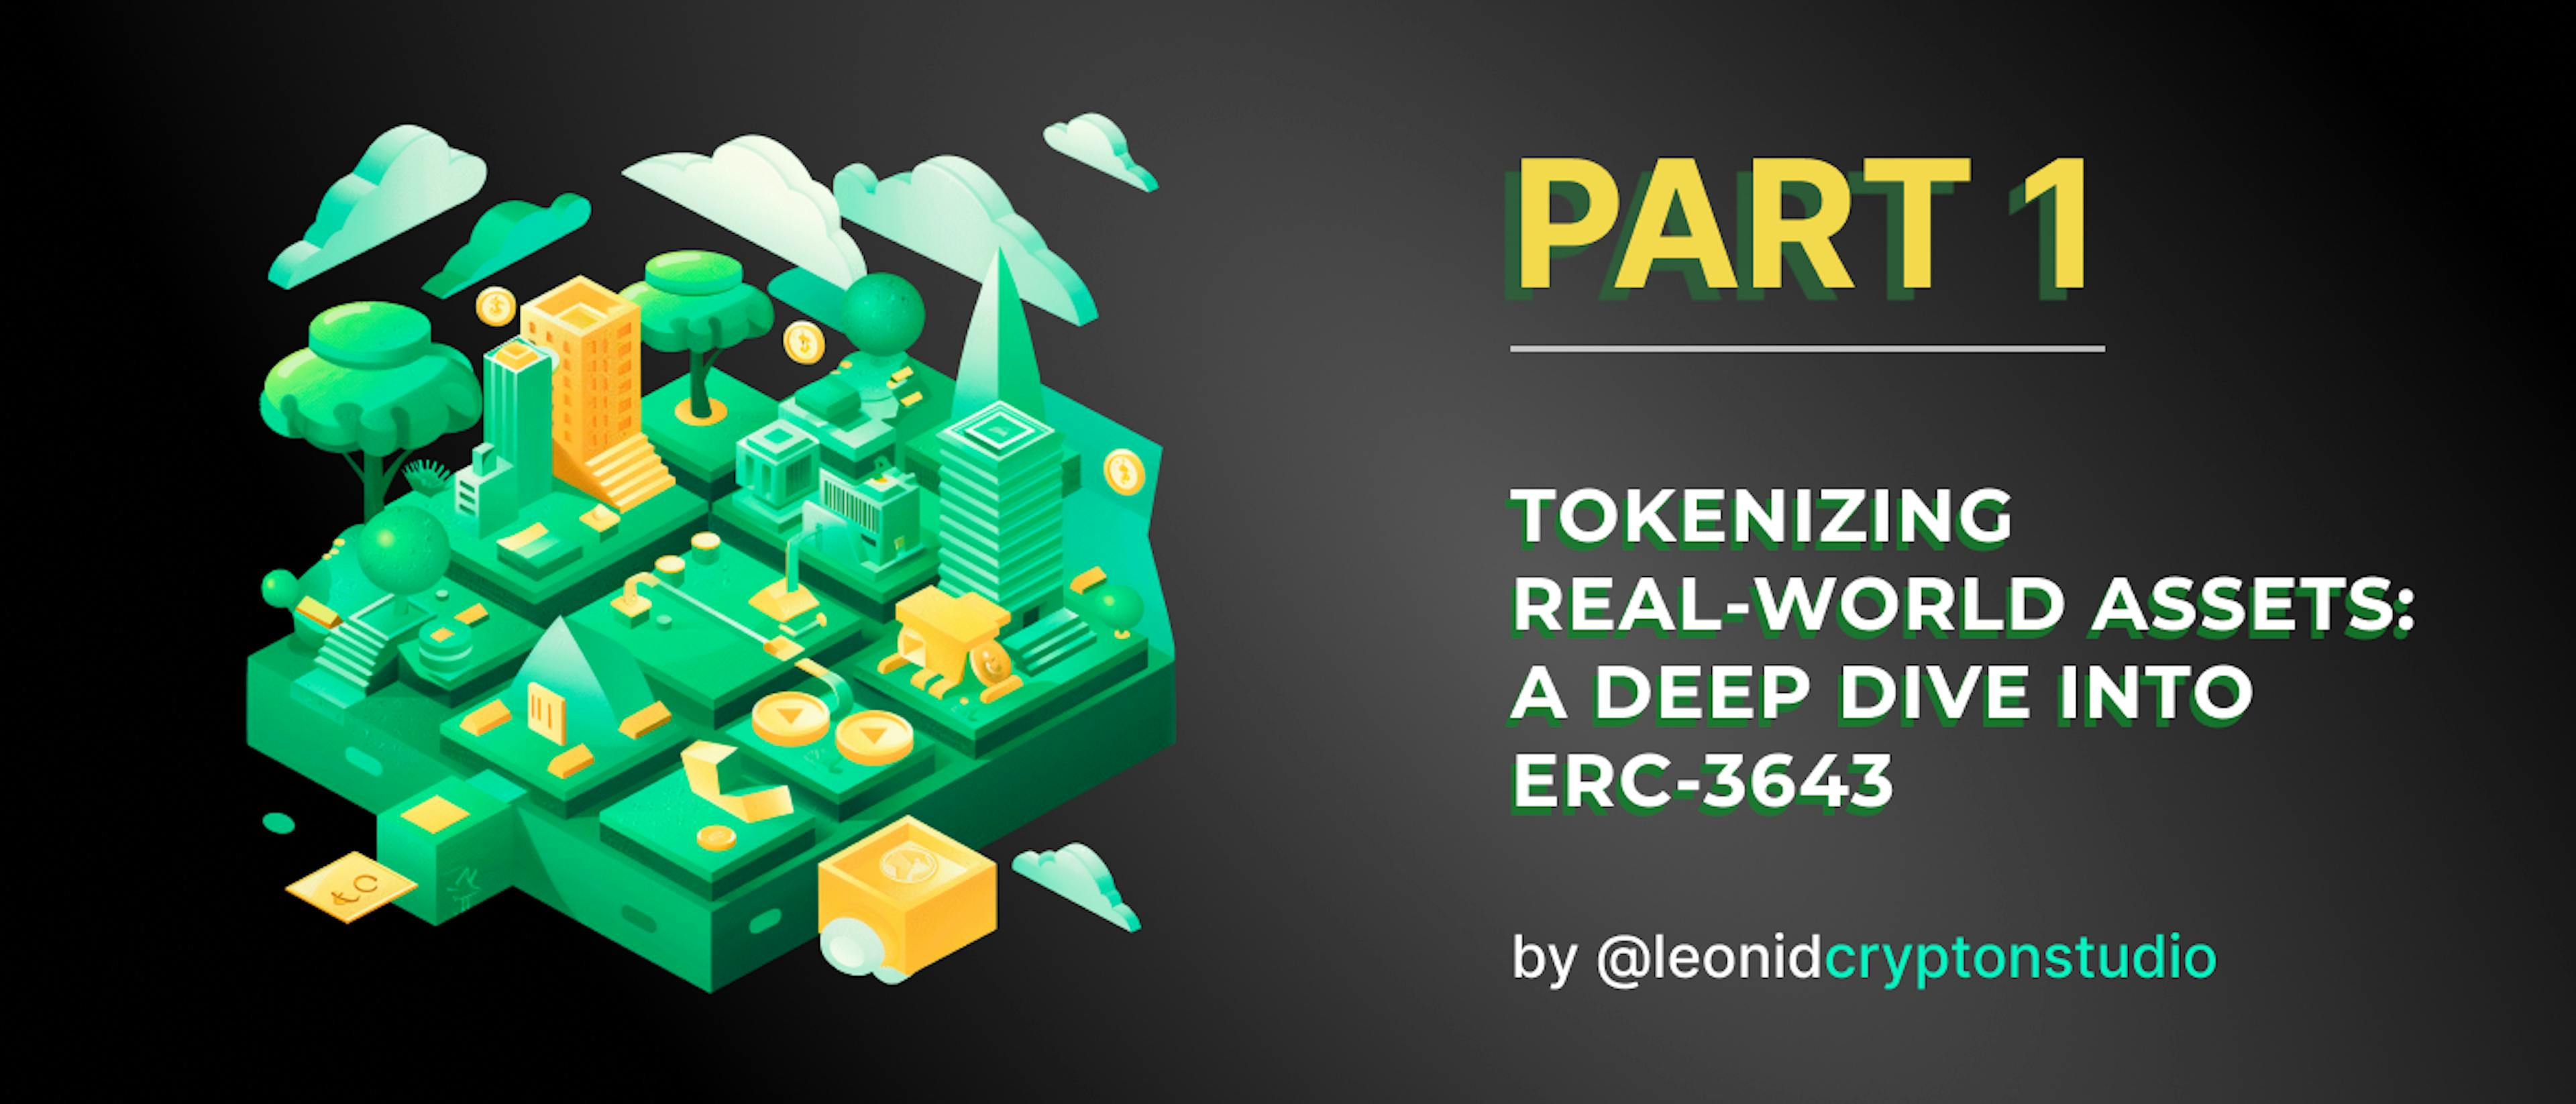 featured image - Tokenizing Real-World Assets (RWA) Part 1: A Deep Dive into ERC-3643